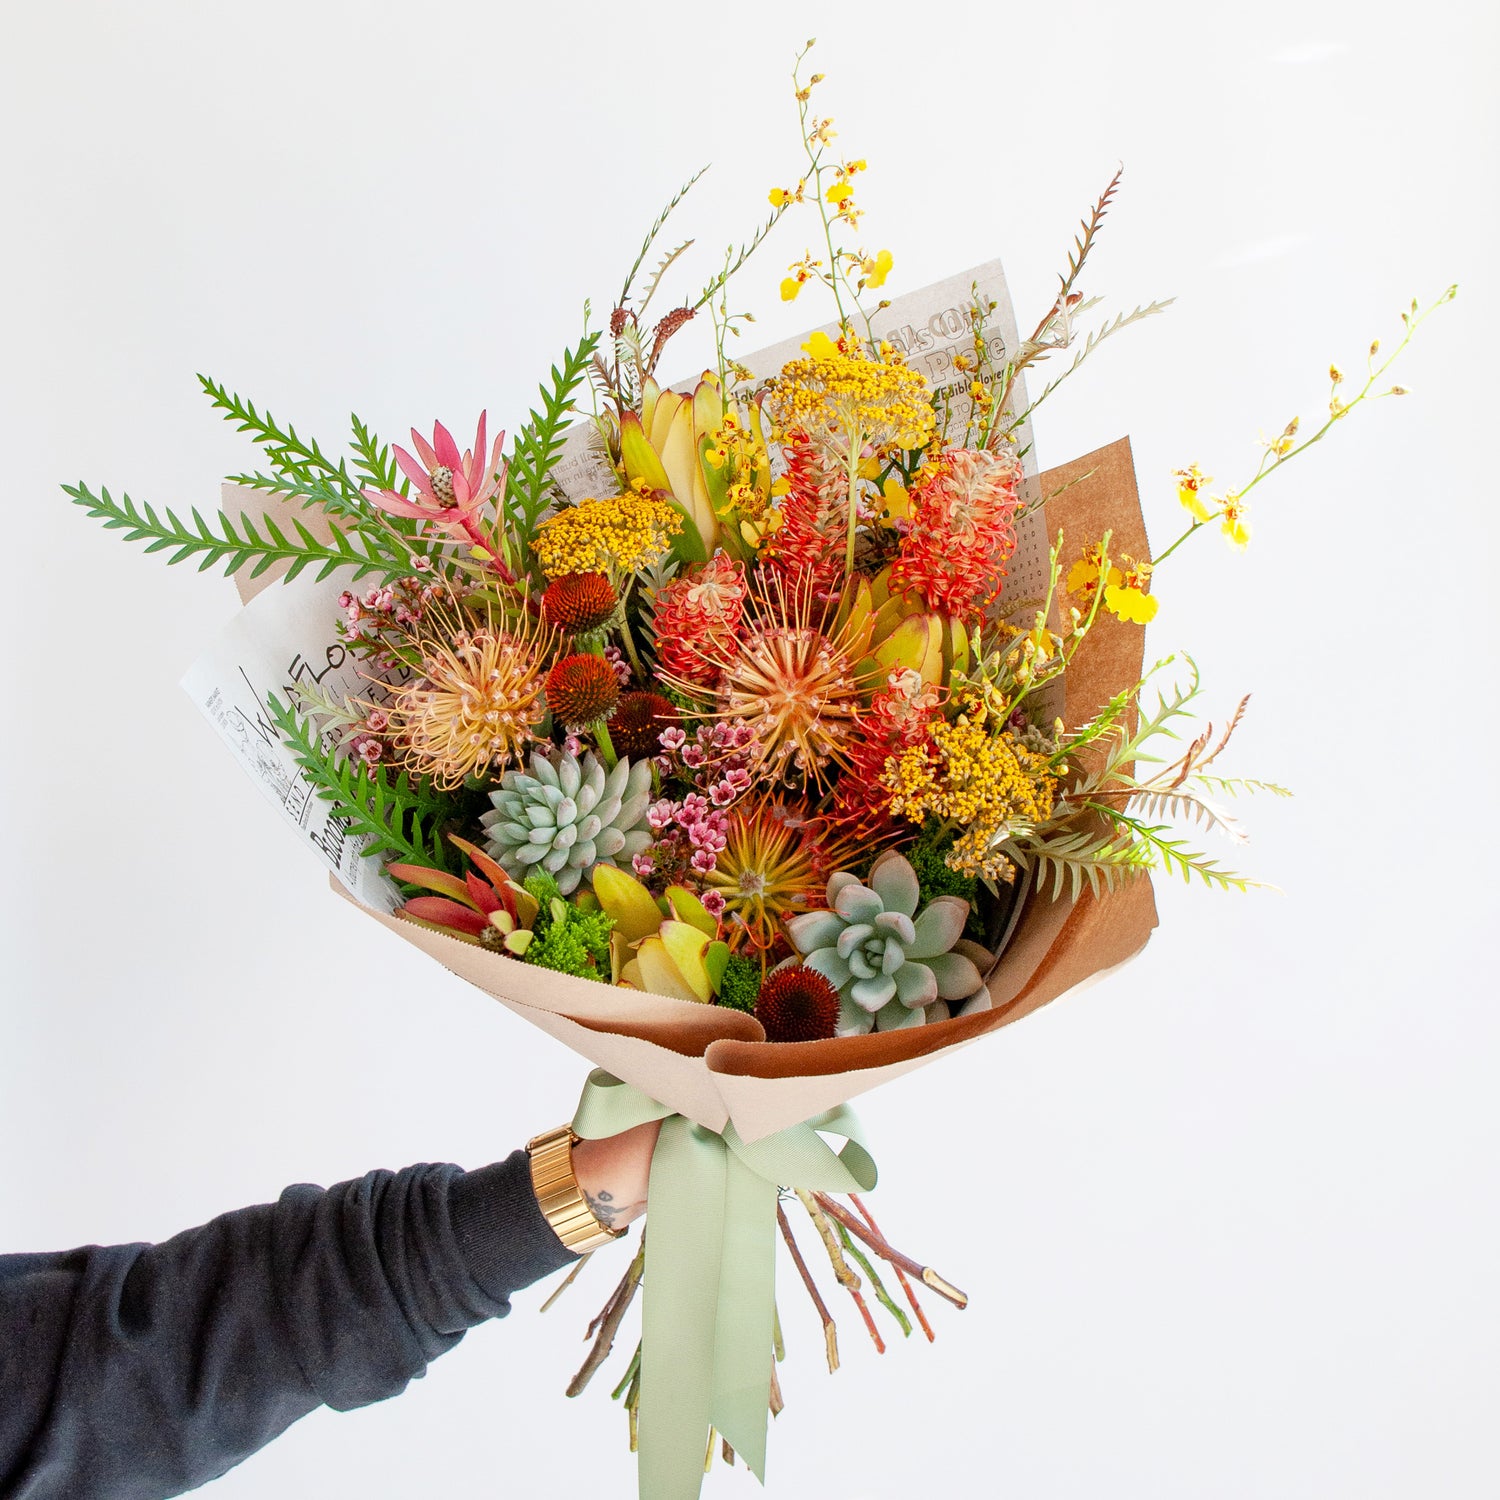 An arm holds a bouquet wrapped in floral newspaper and brown kraft paper in front of a white backdrop. It's filled with yellow, red, and orange flowers, including pincushion protea, grevillea, succulents, leucantha, oncidium orchid, and thistle. The bouquet has a green bow.